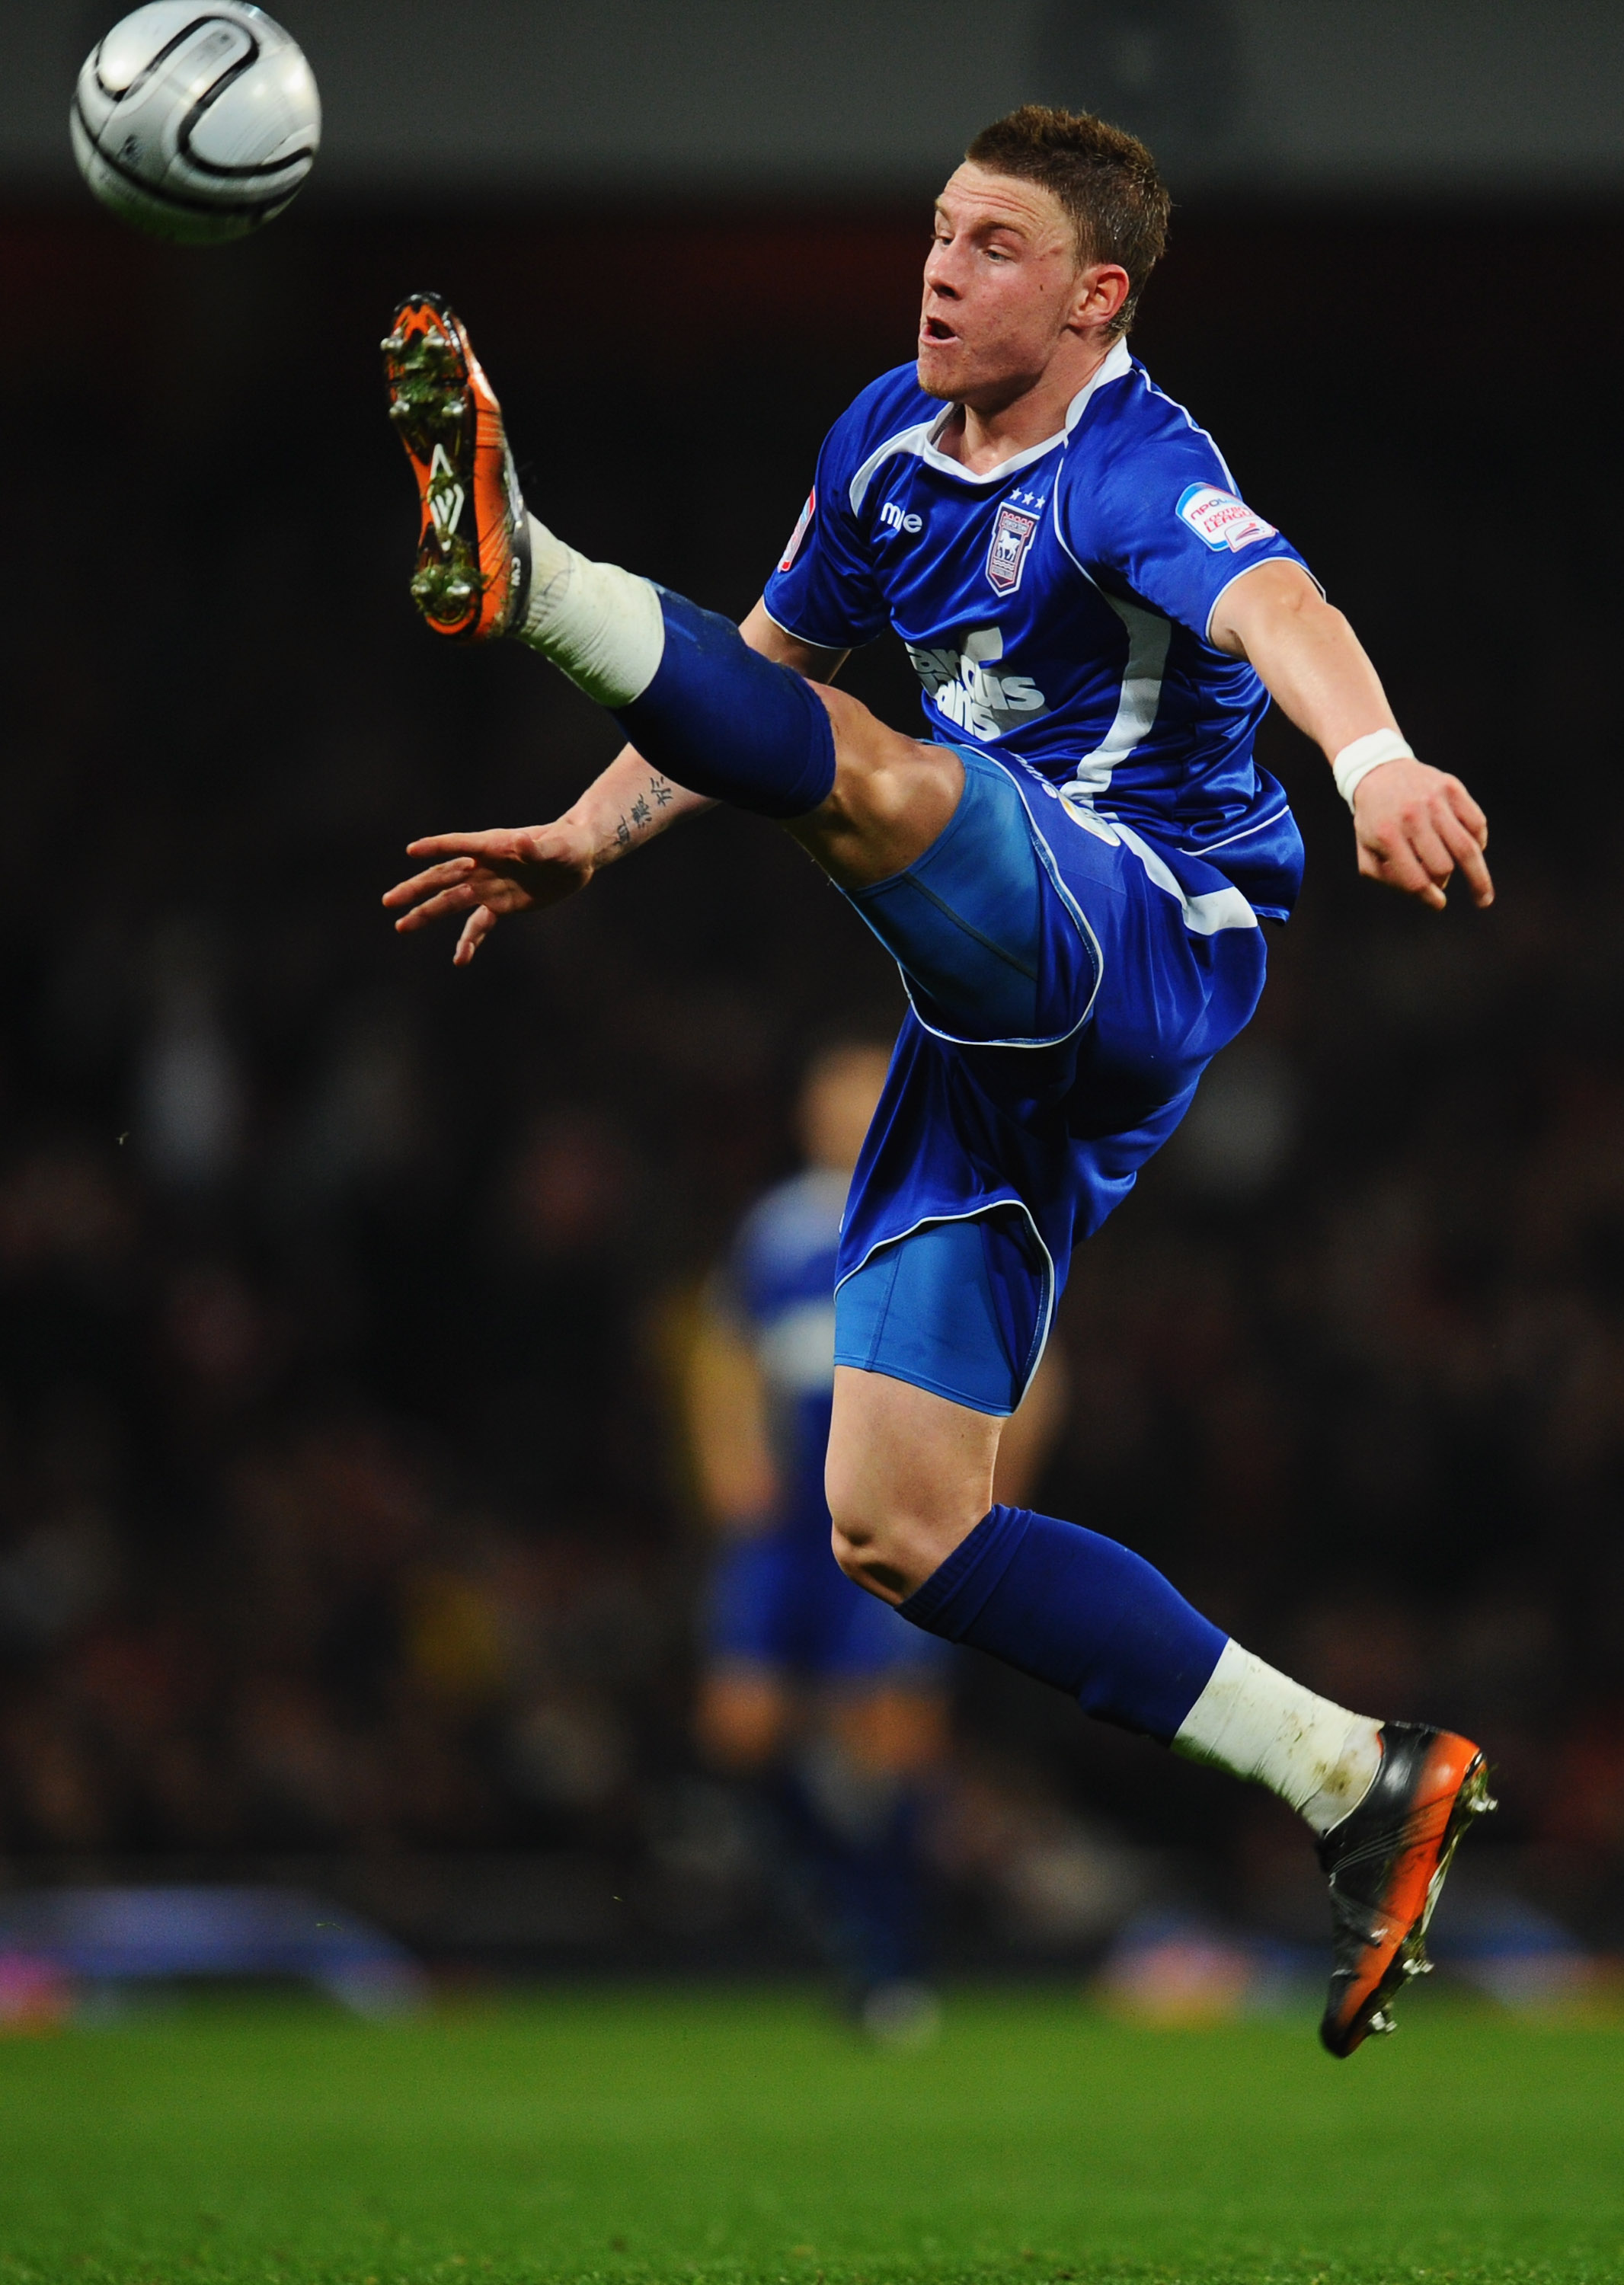 LONDON, ENGLAND - JANUARY 25:  Connor Wickham of Ipswich Town in action during the Carling Cup Semi Final Second Leg match between Arsenal and Ipswich Town at Emirates Stadium on January 25, 2011 in London, England.  (Photo by Clive Mason/Getty Images)